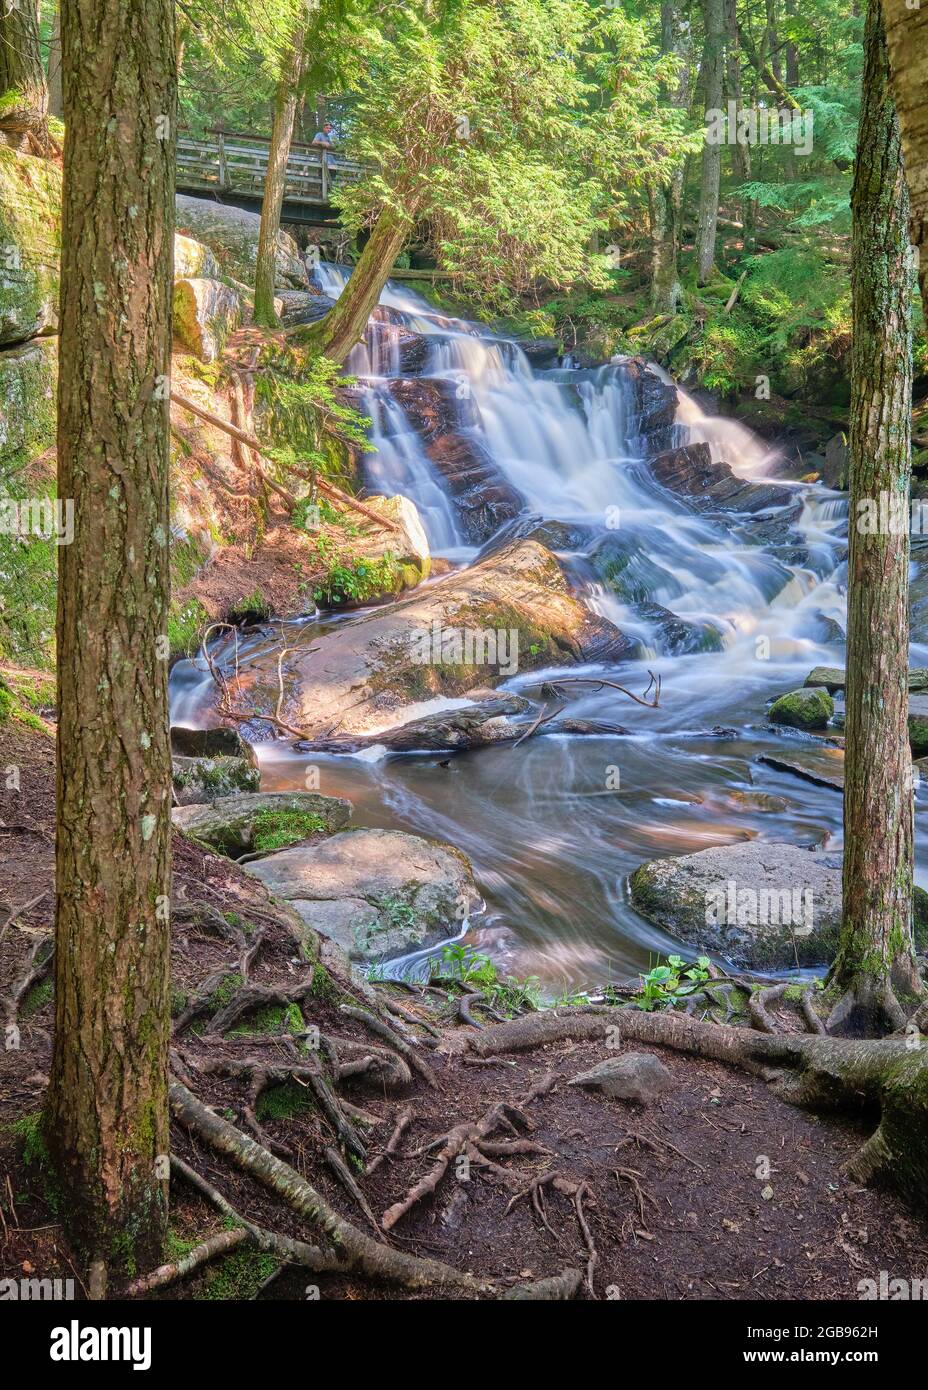 Photograph of Potts Falls in Bracebridge Ontario looking towards the falls from downstream in portrait orientation. Stock Photo